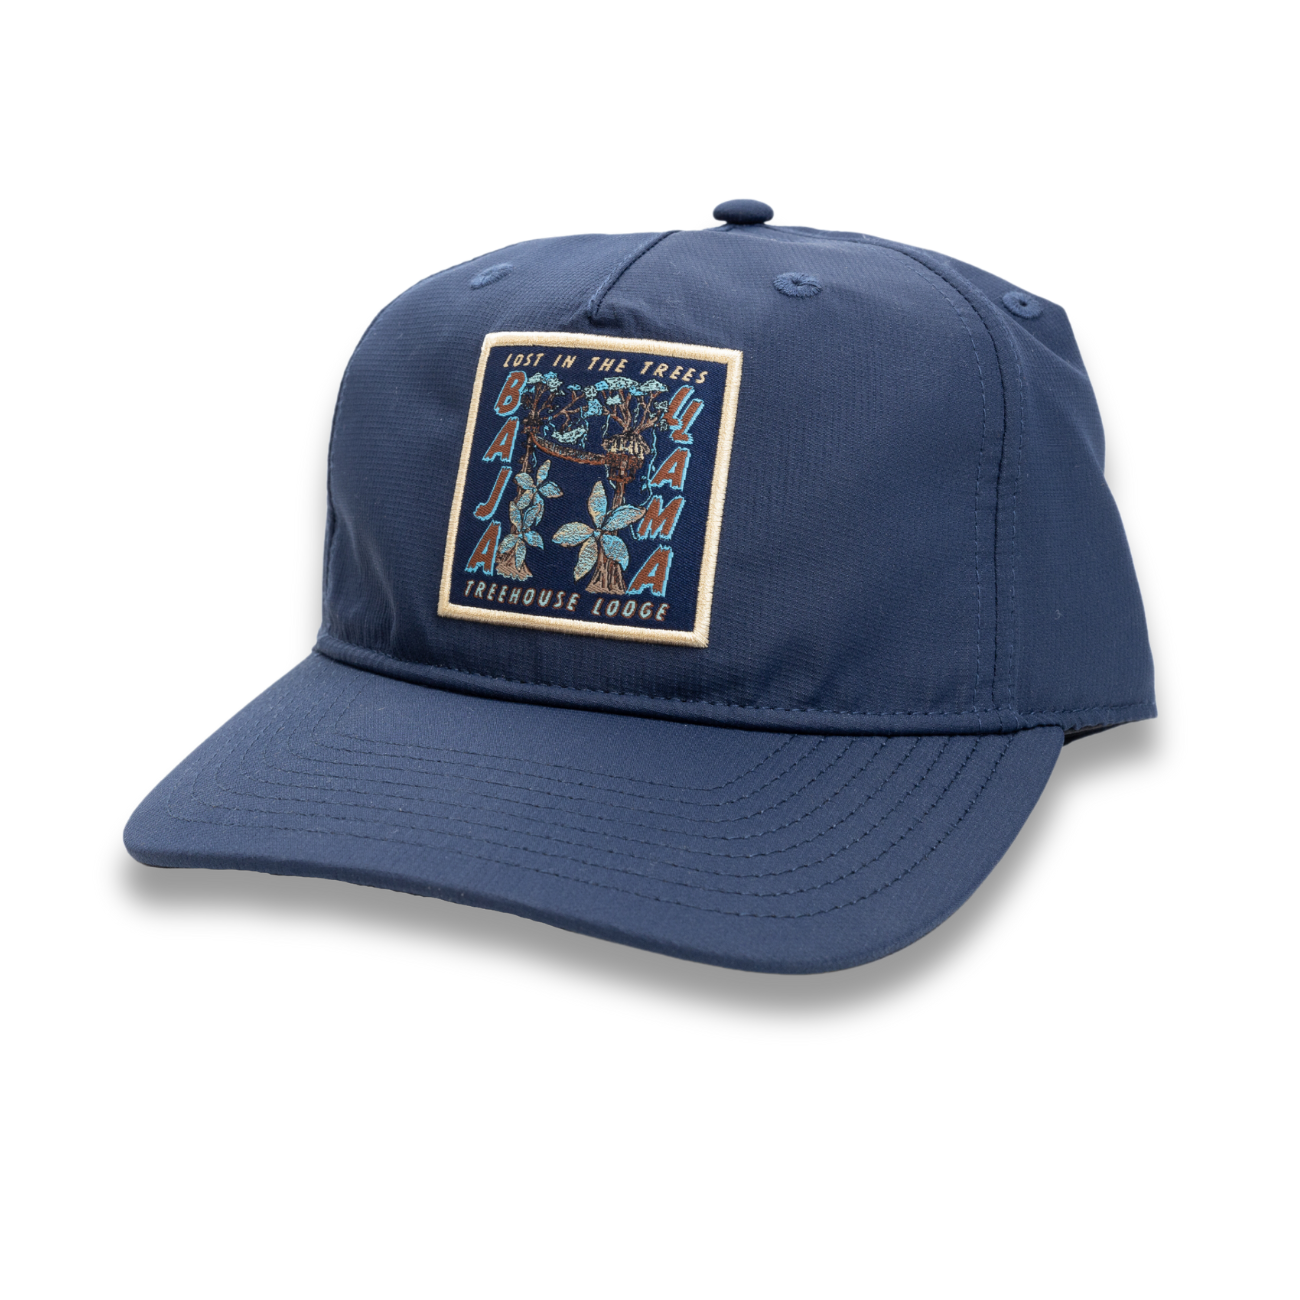 Navy treehouse lodge logo embroidered 5 panel performance hat